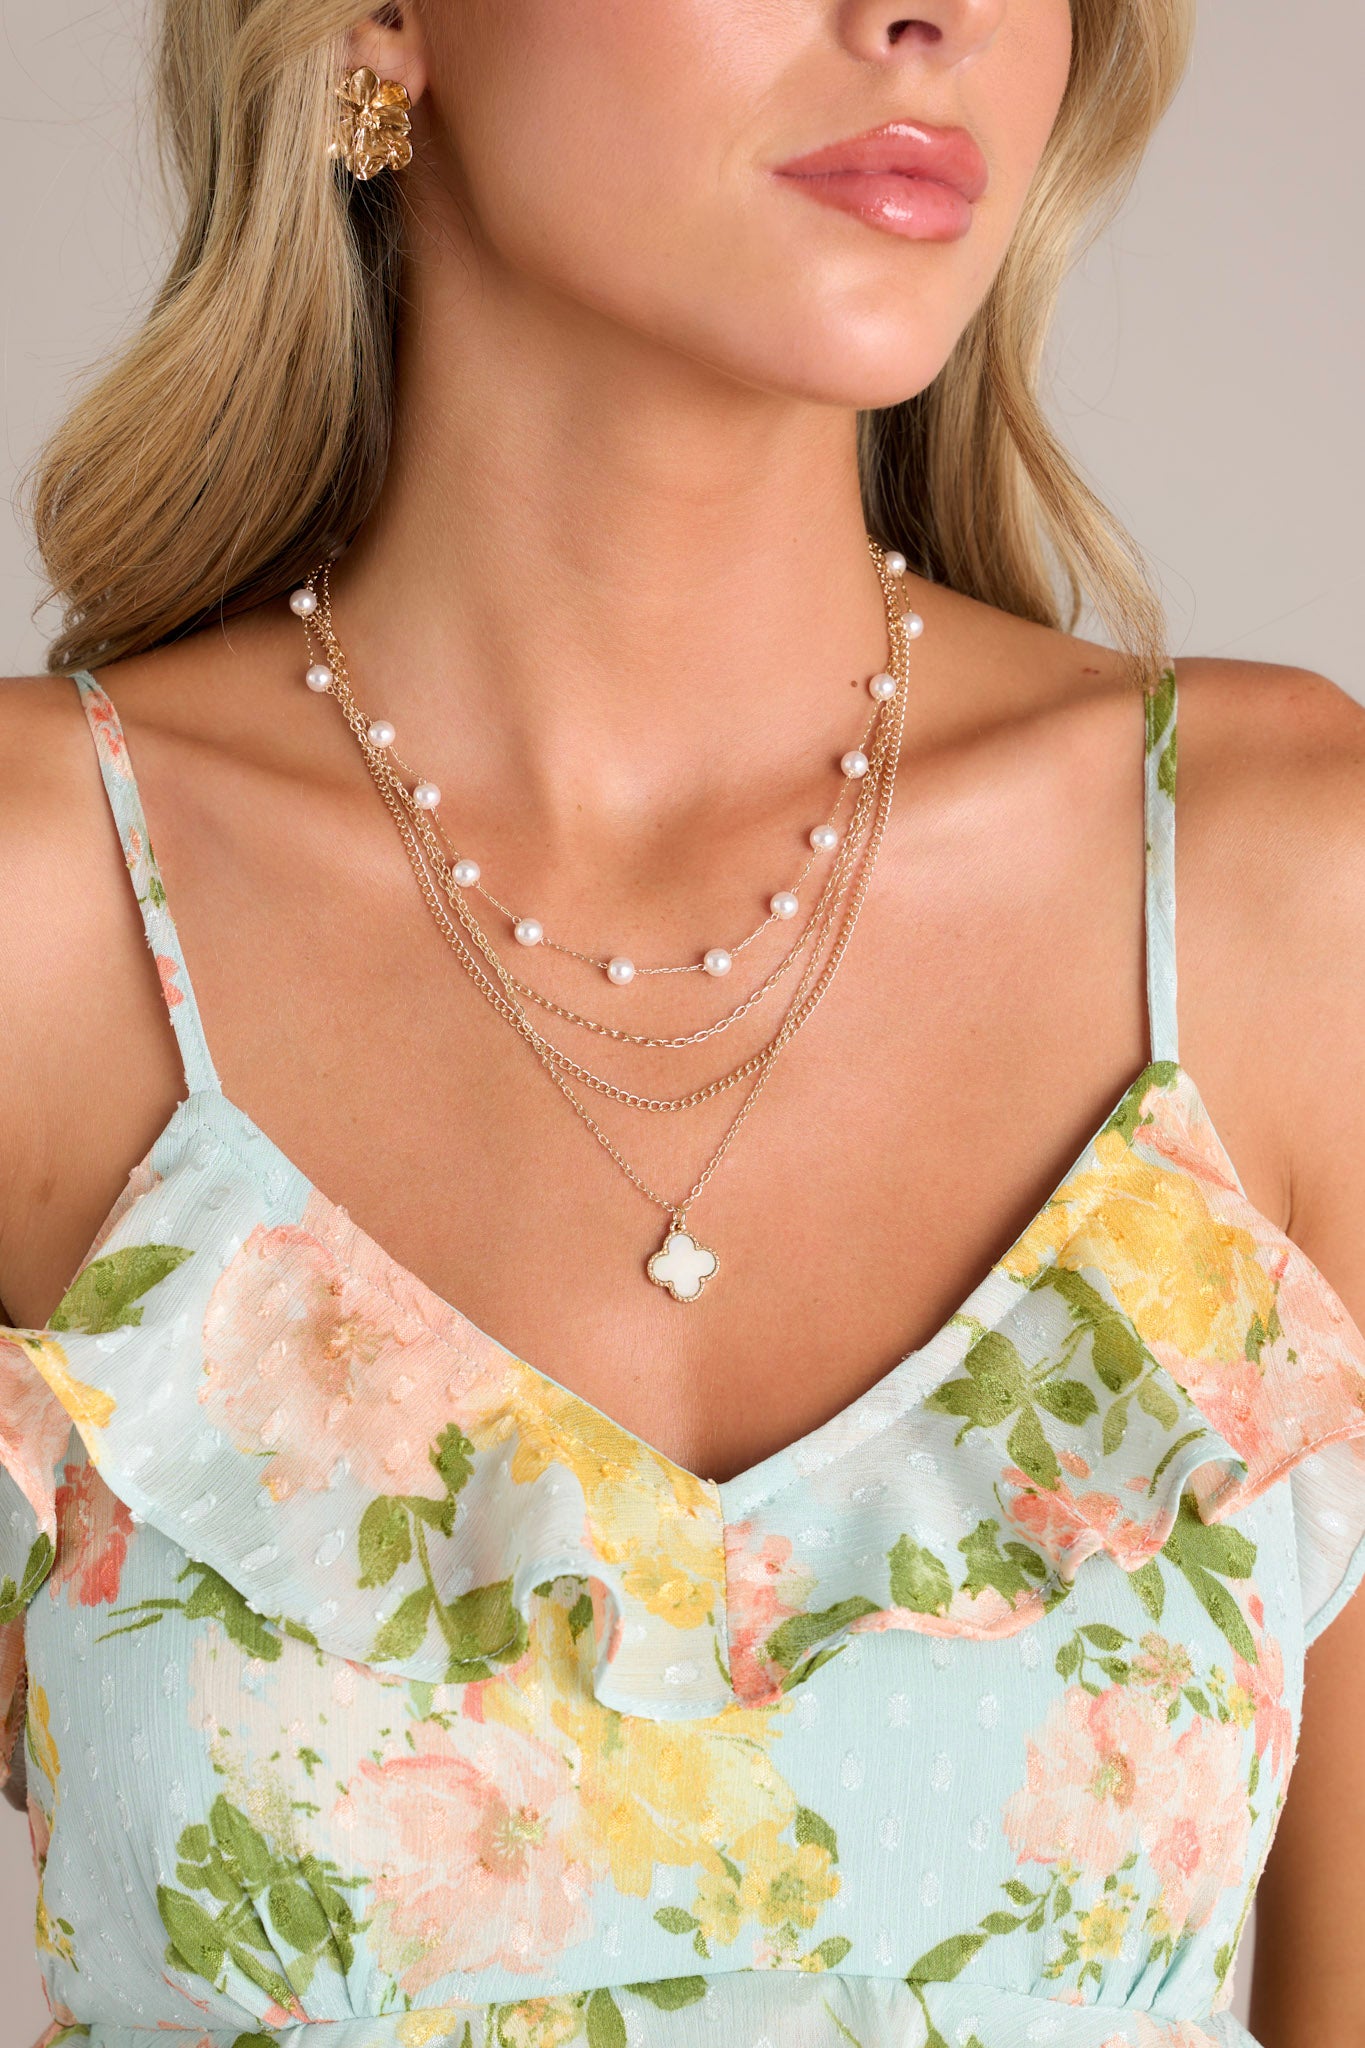 This gold necklace features gold hardware, a faux pearl chain, a chain with a iridescent clover charm, two thin gold chains, and a lobster claw clasp.